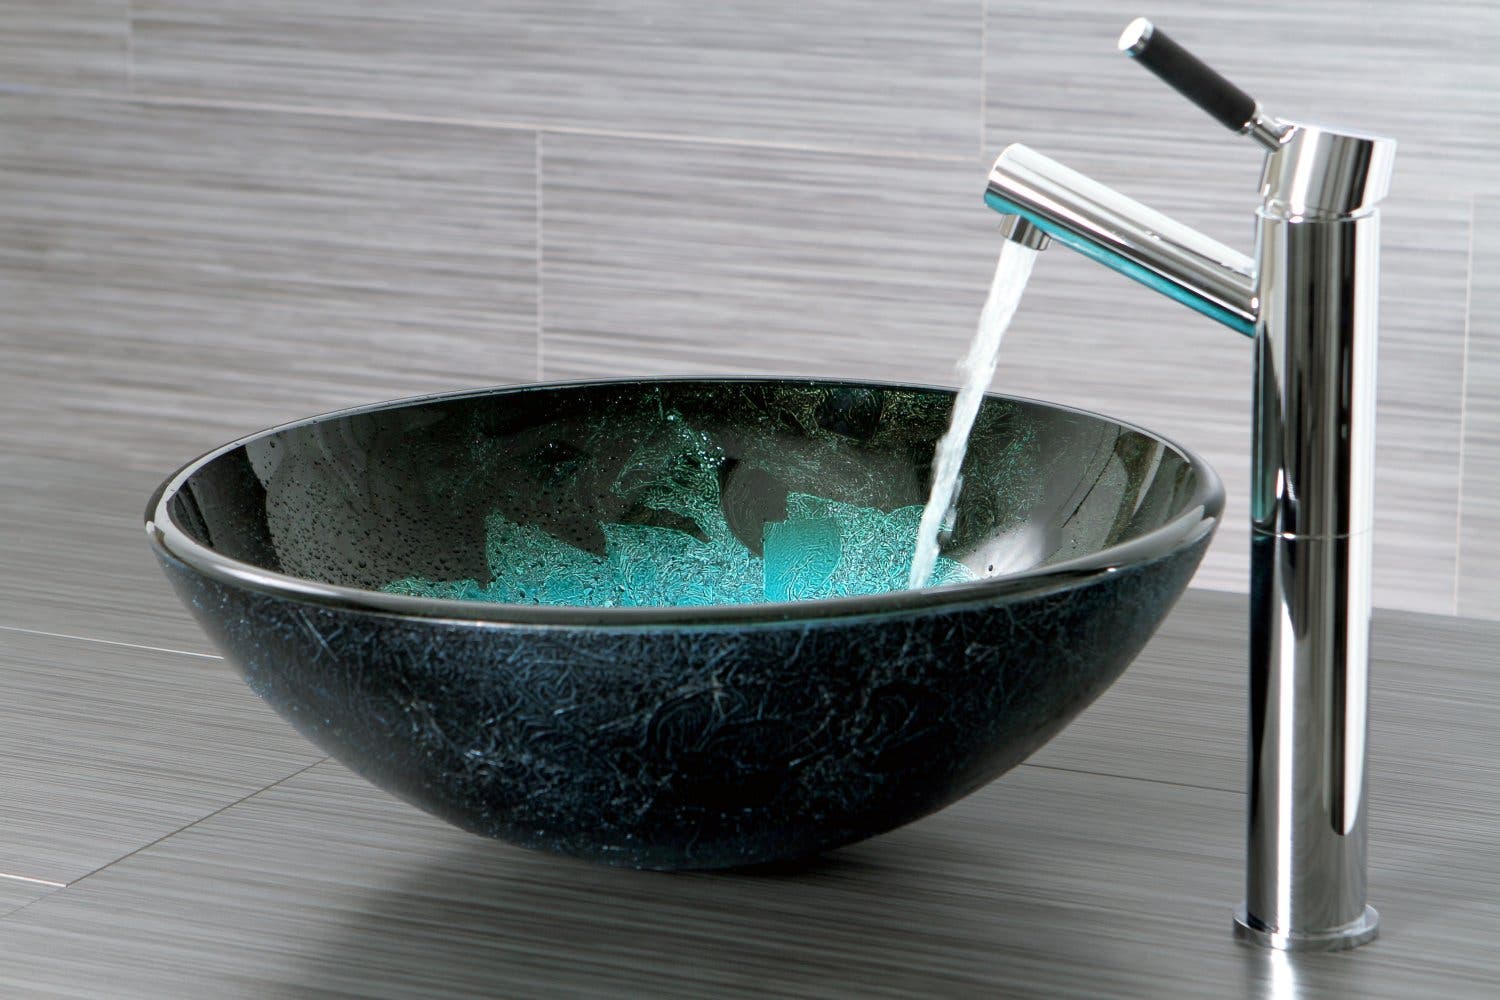 The Splendor of the Sea is at your Fingertips with the Fauceture Vessel Sink, EVSPFH6